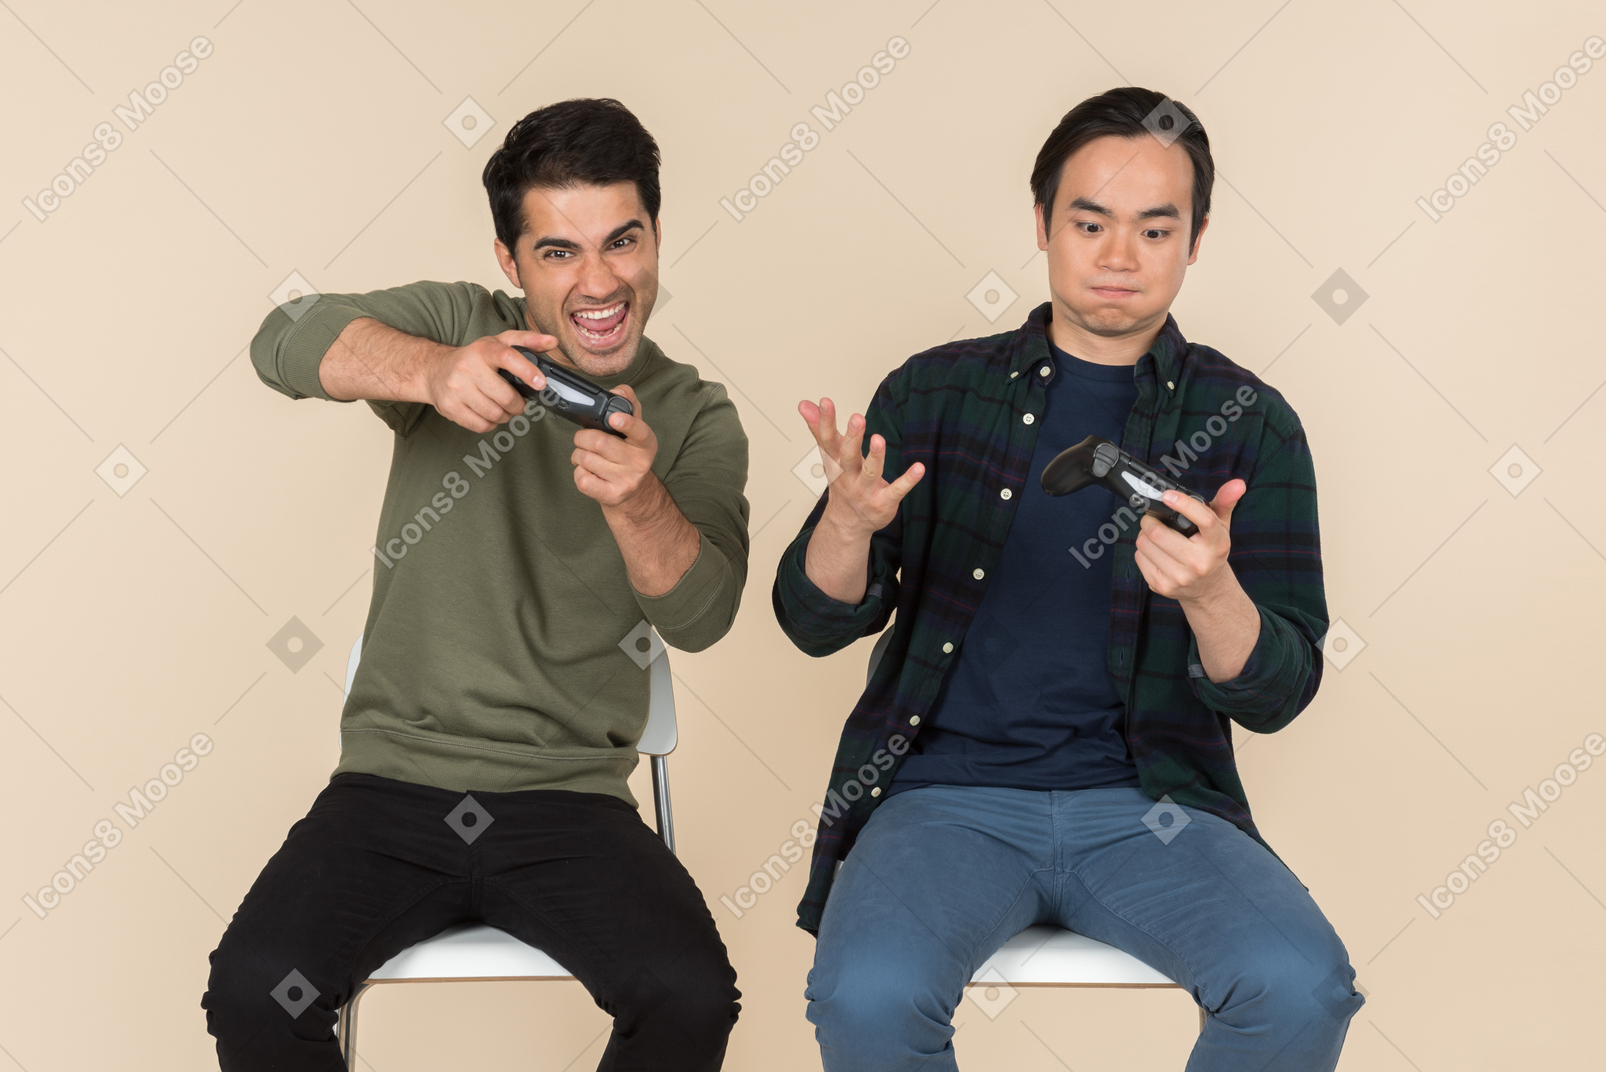 Interracial friends sitting in chairs and playing video game